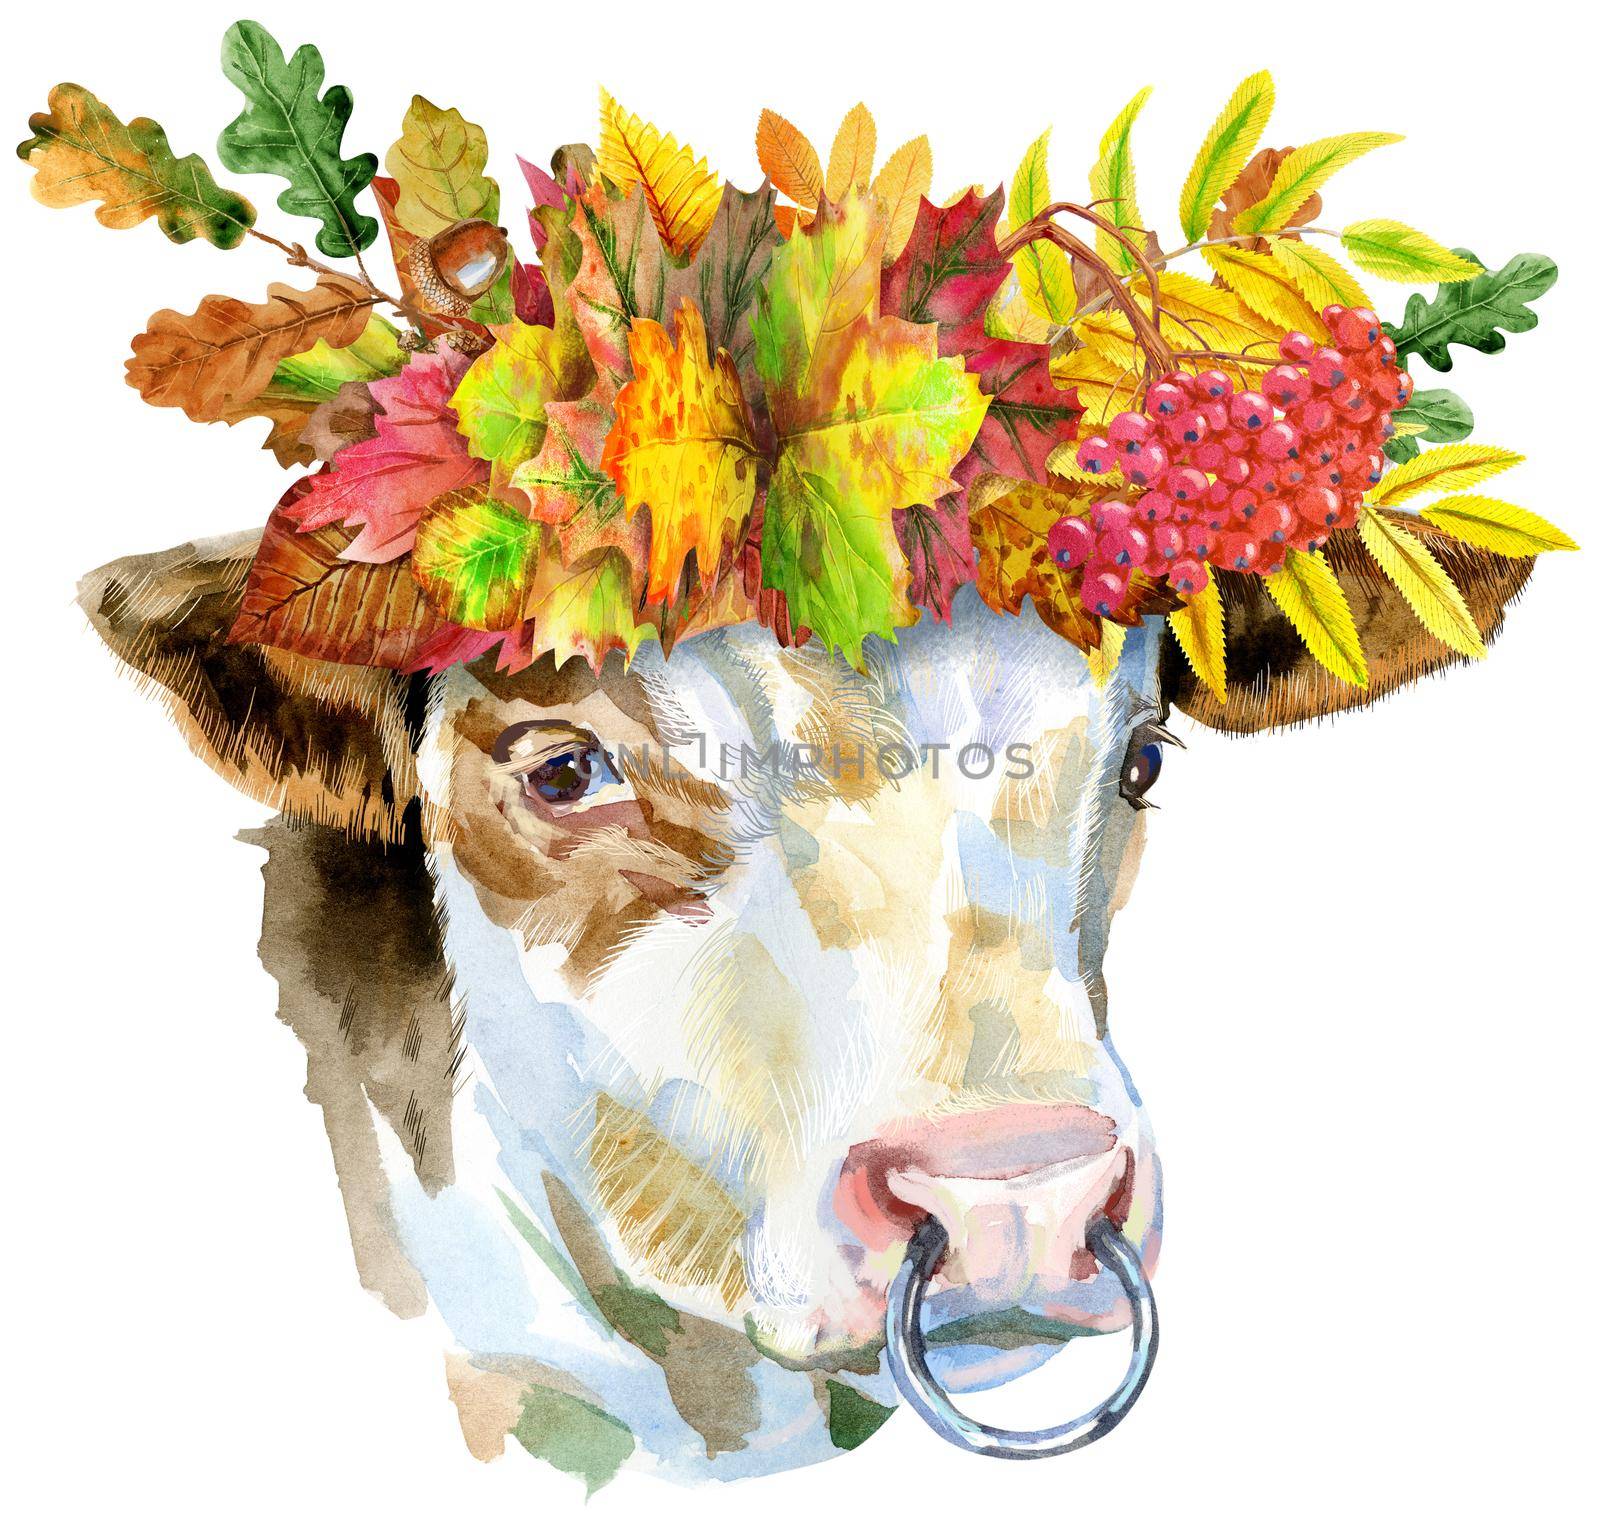 Watercolor illustration of a white bull in a wreath of autumn leaves by NataOmsk